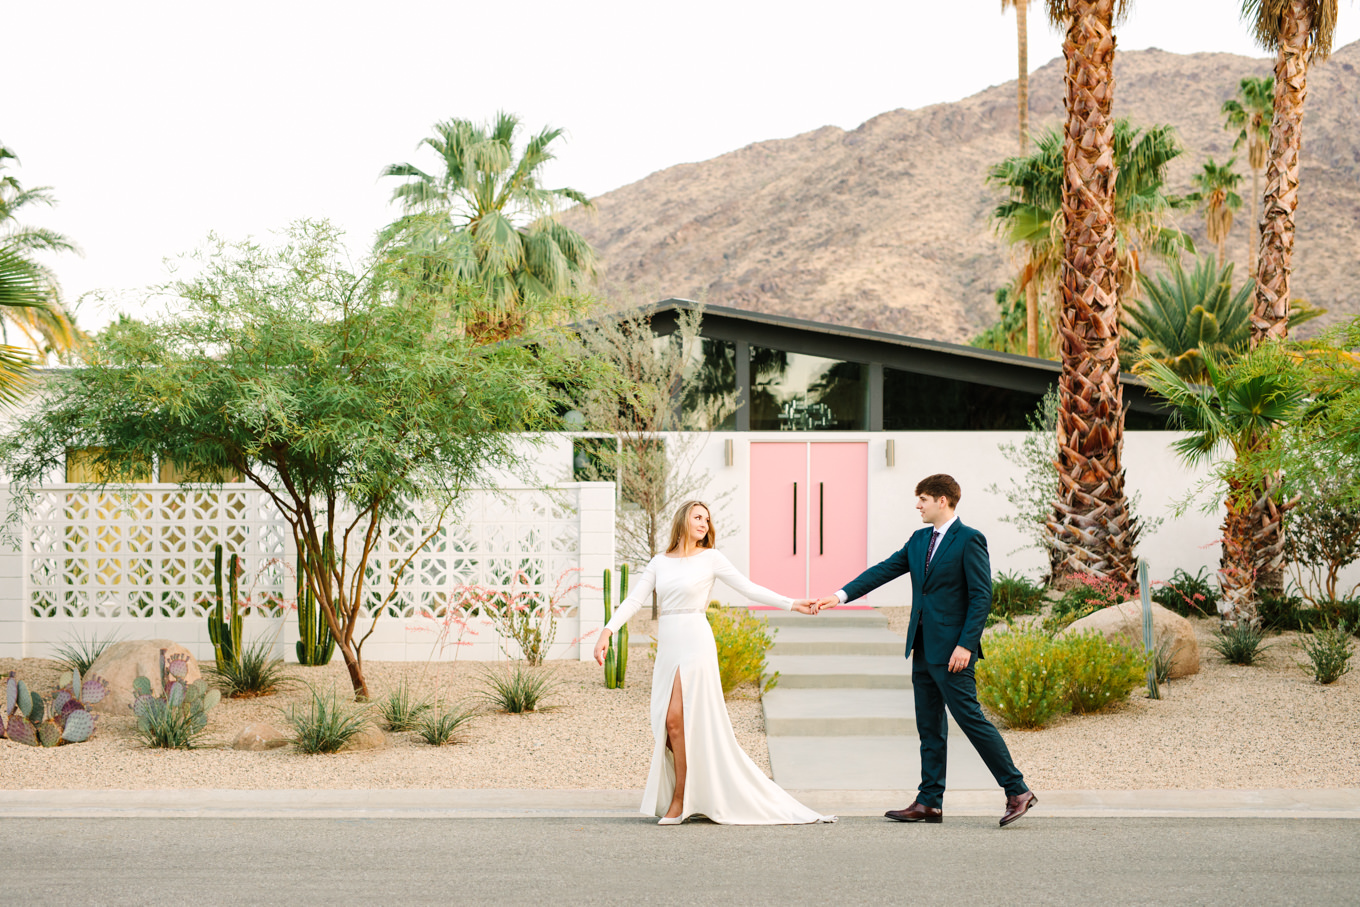 Bride and groom walking in front of pink door house | Colorful jewel tone Palm Springs elopement | Fresh and colorful photography for fun-loving couples in Southern California | #colorfulelopement #palmspringselopement #elopementphotography #palmspringswedding Source: Mary Costa Photography | Los Angeles